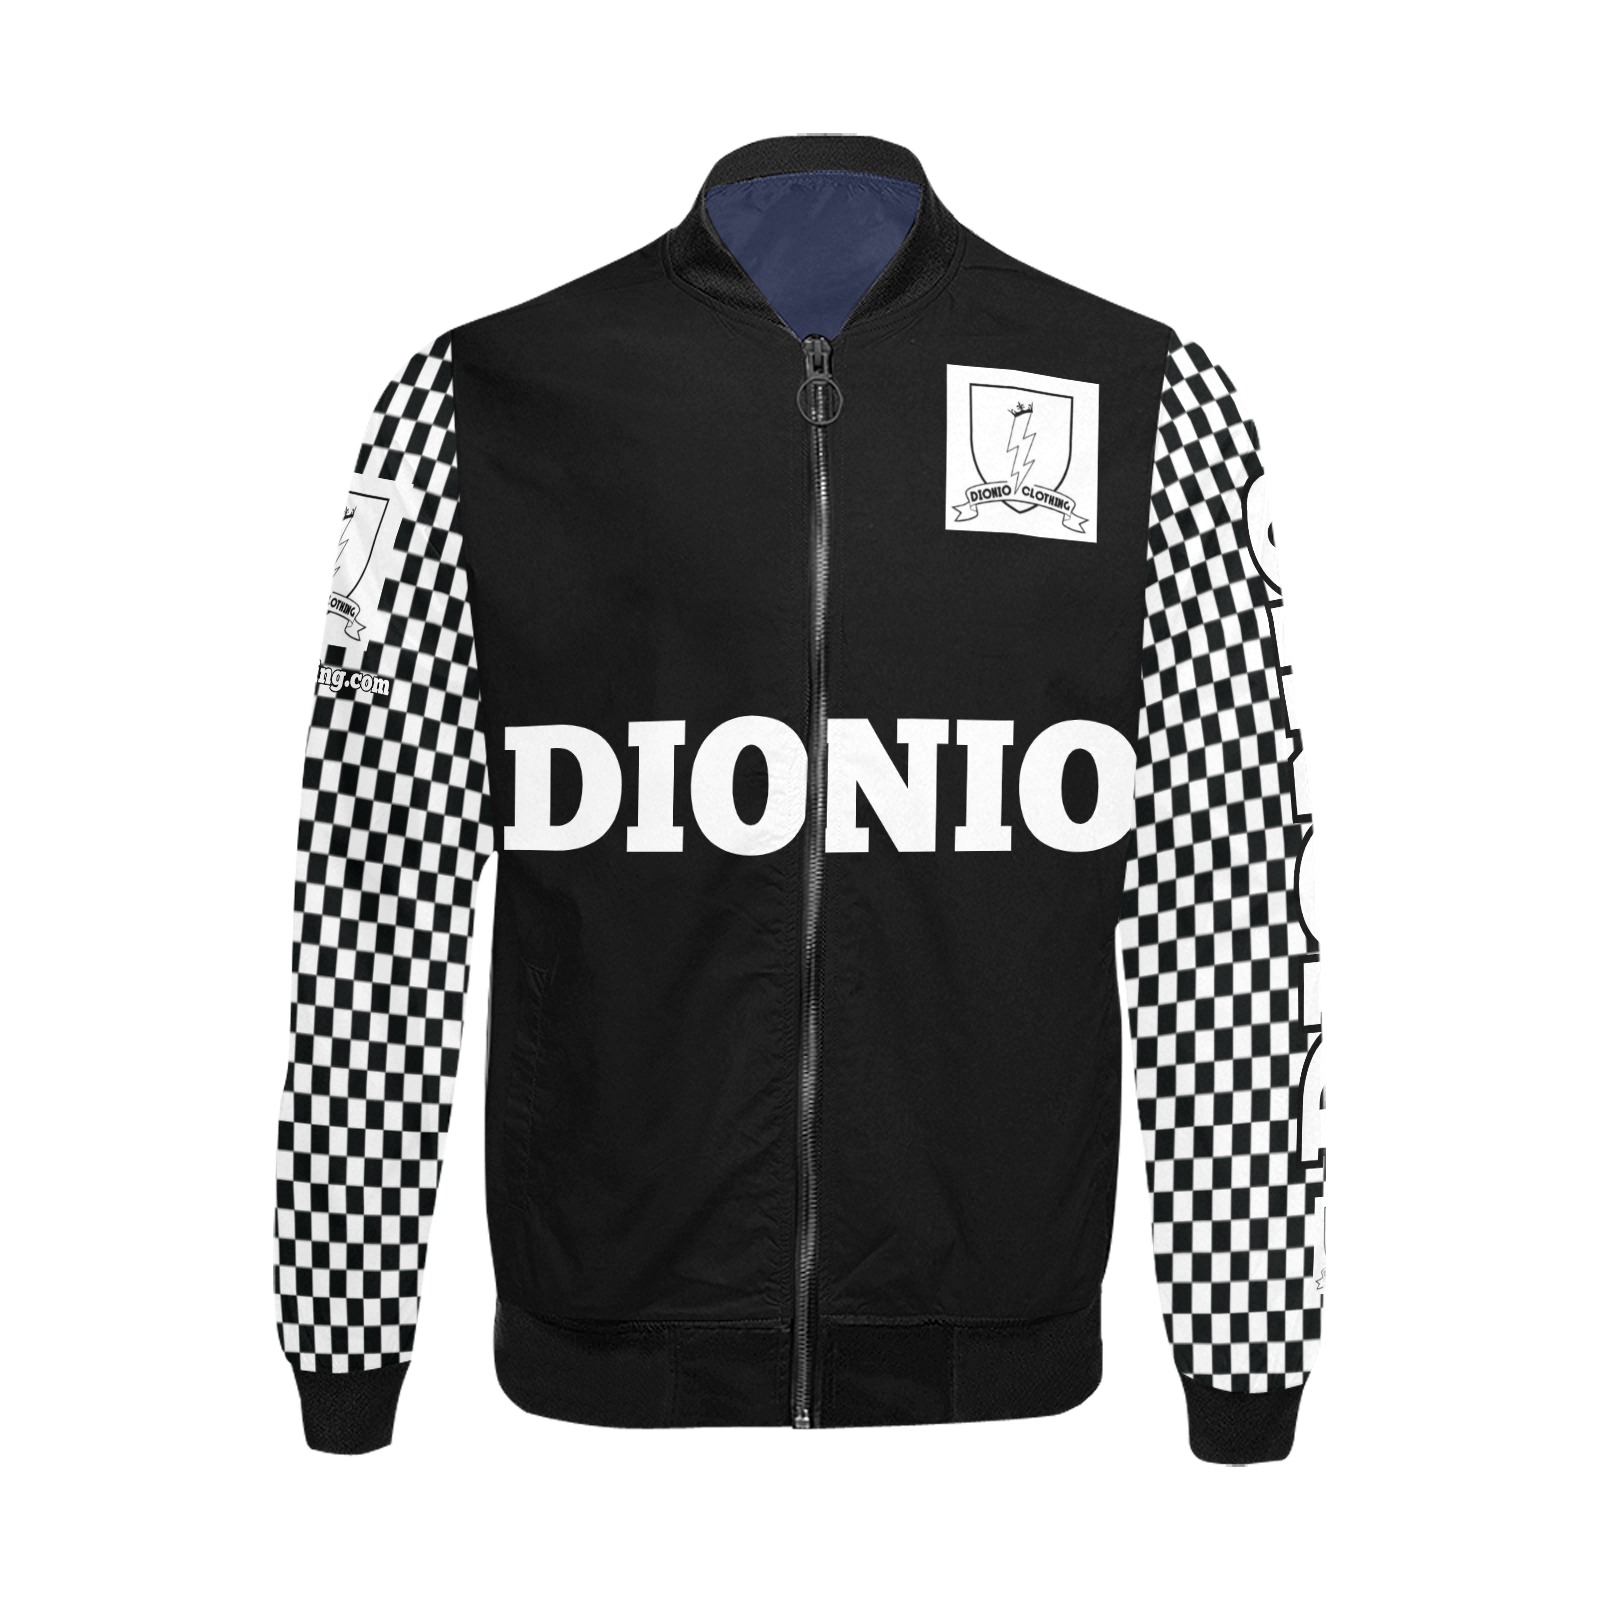 DIONIO Clothing - Checkered Armed Black & White Bomber Jacket (White Big DIONIO LOGO) All Over Print Bomber Jacket for Men (Model H31)